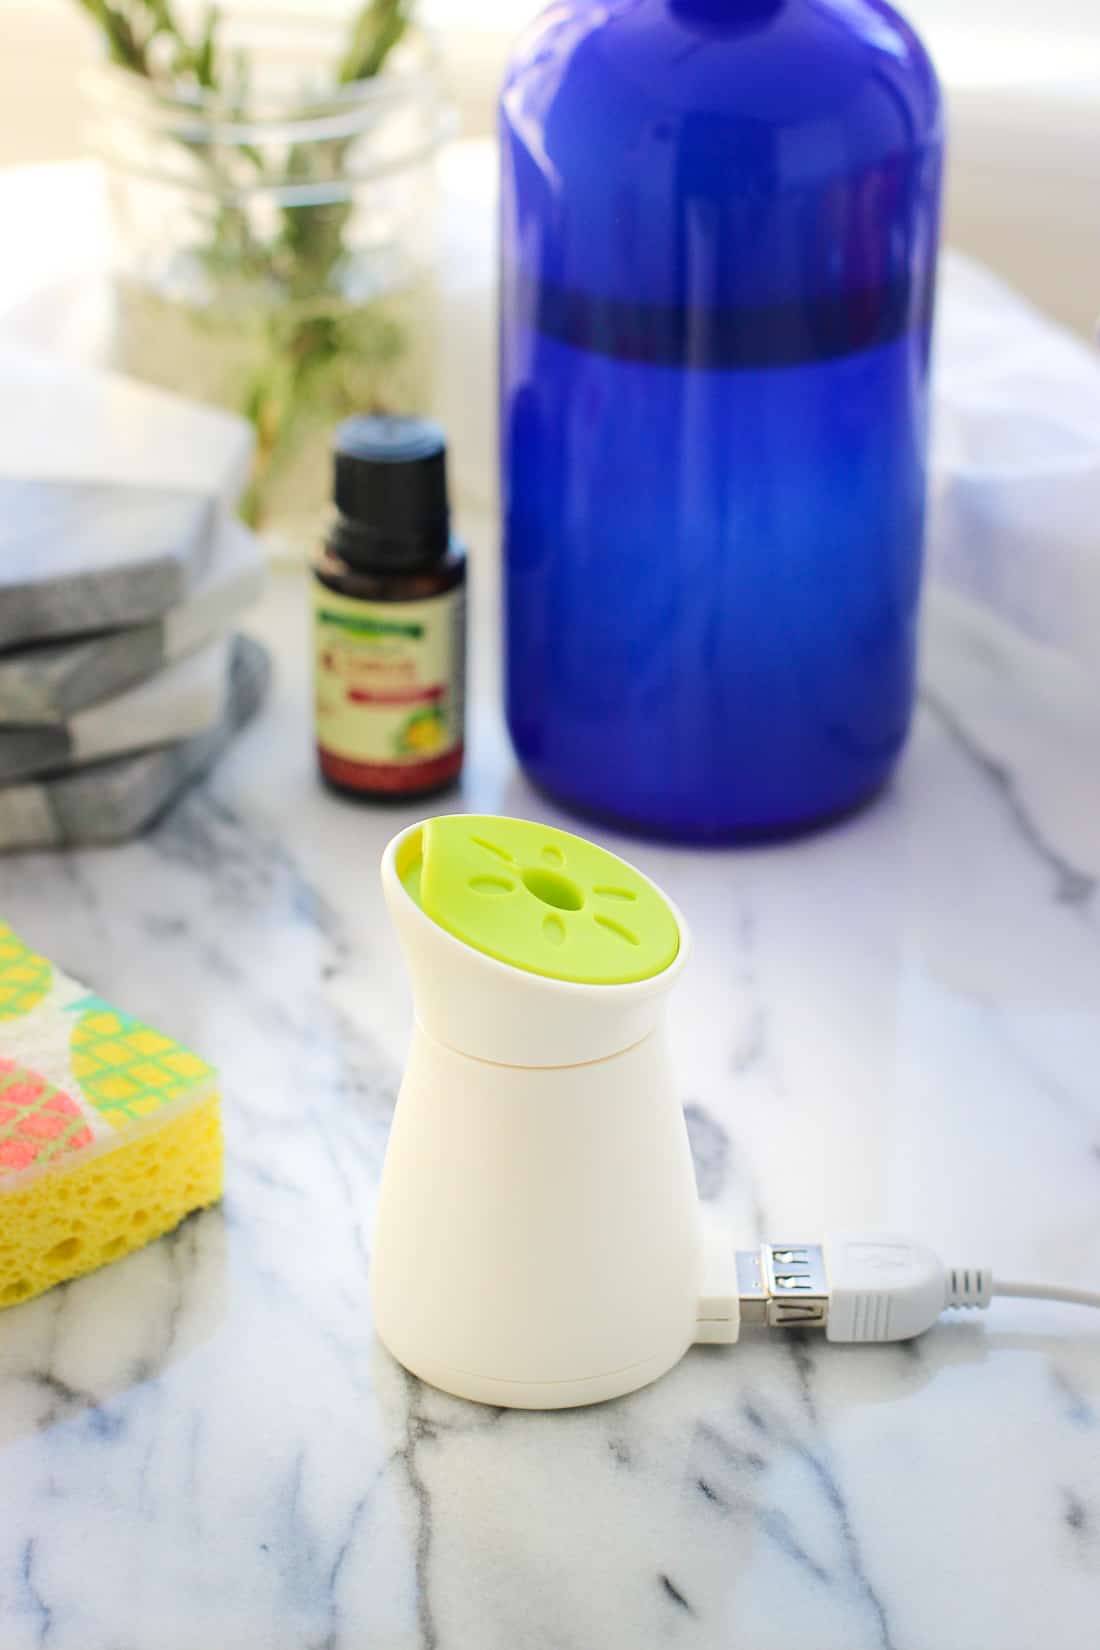 The mini diffuser on a table next to a soap dispenser and a sponge.